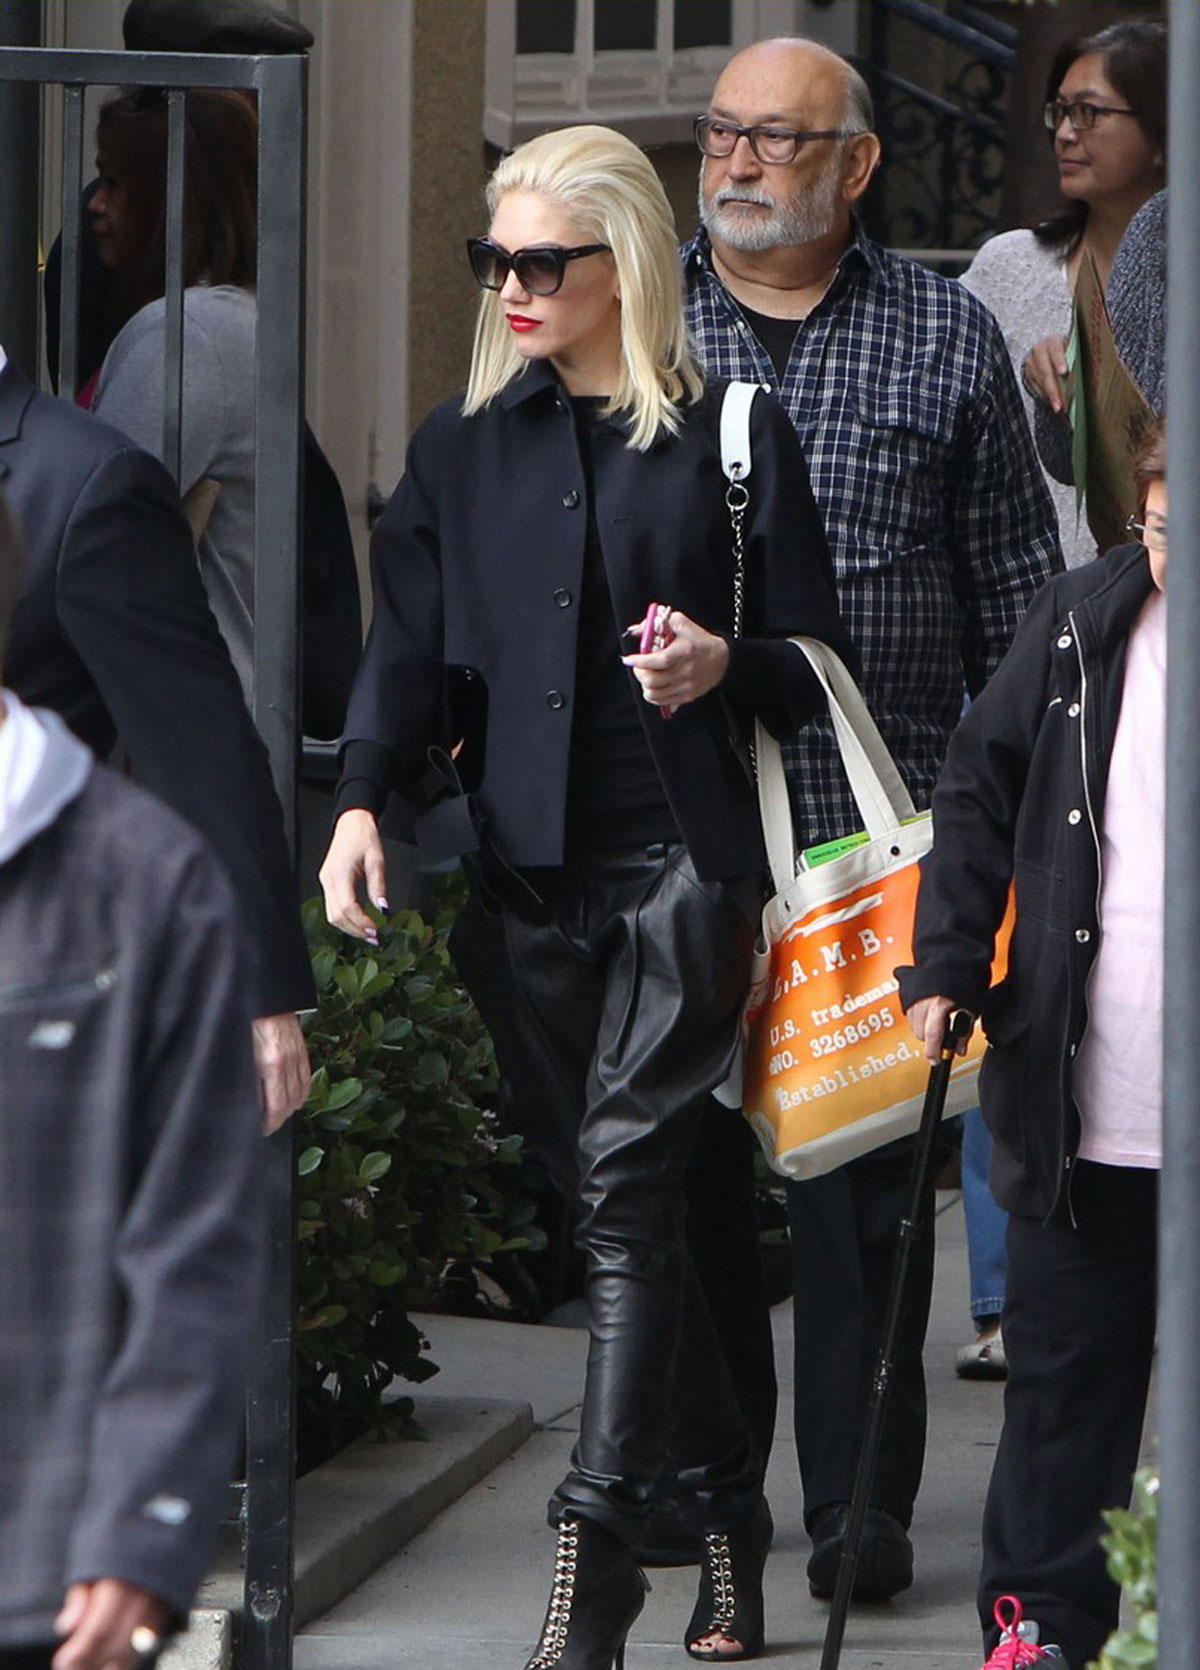 Gwen Stefani out and about in Los Angeles